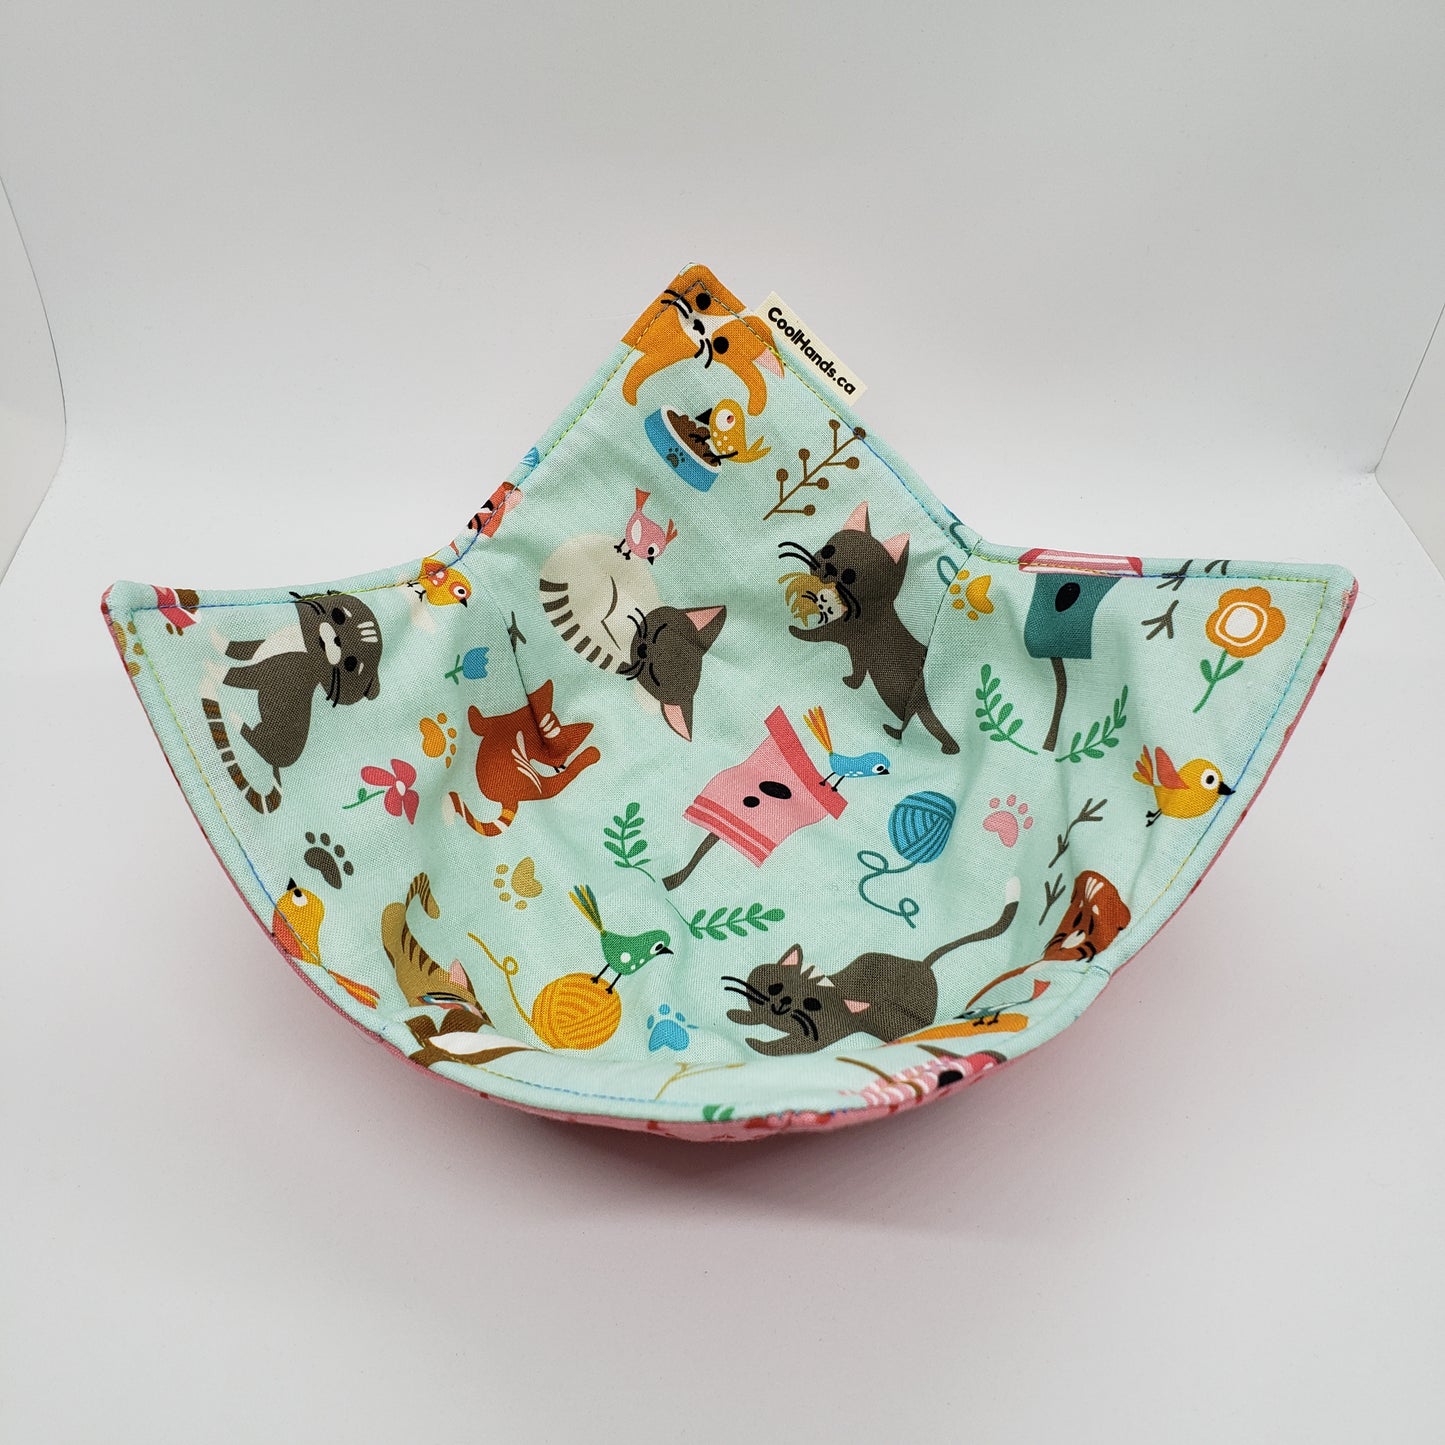 100% Cotton Microwavable Bowl Cozy - "The Whole Kitten Caboodle"